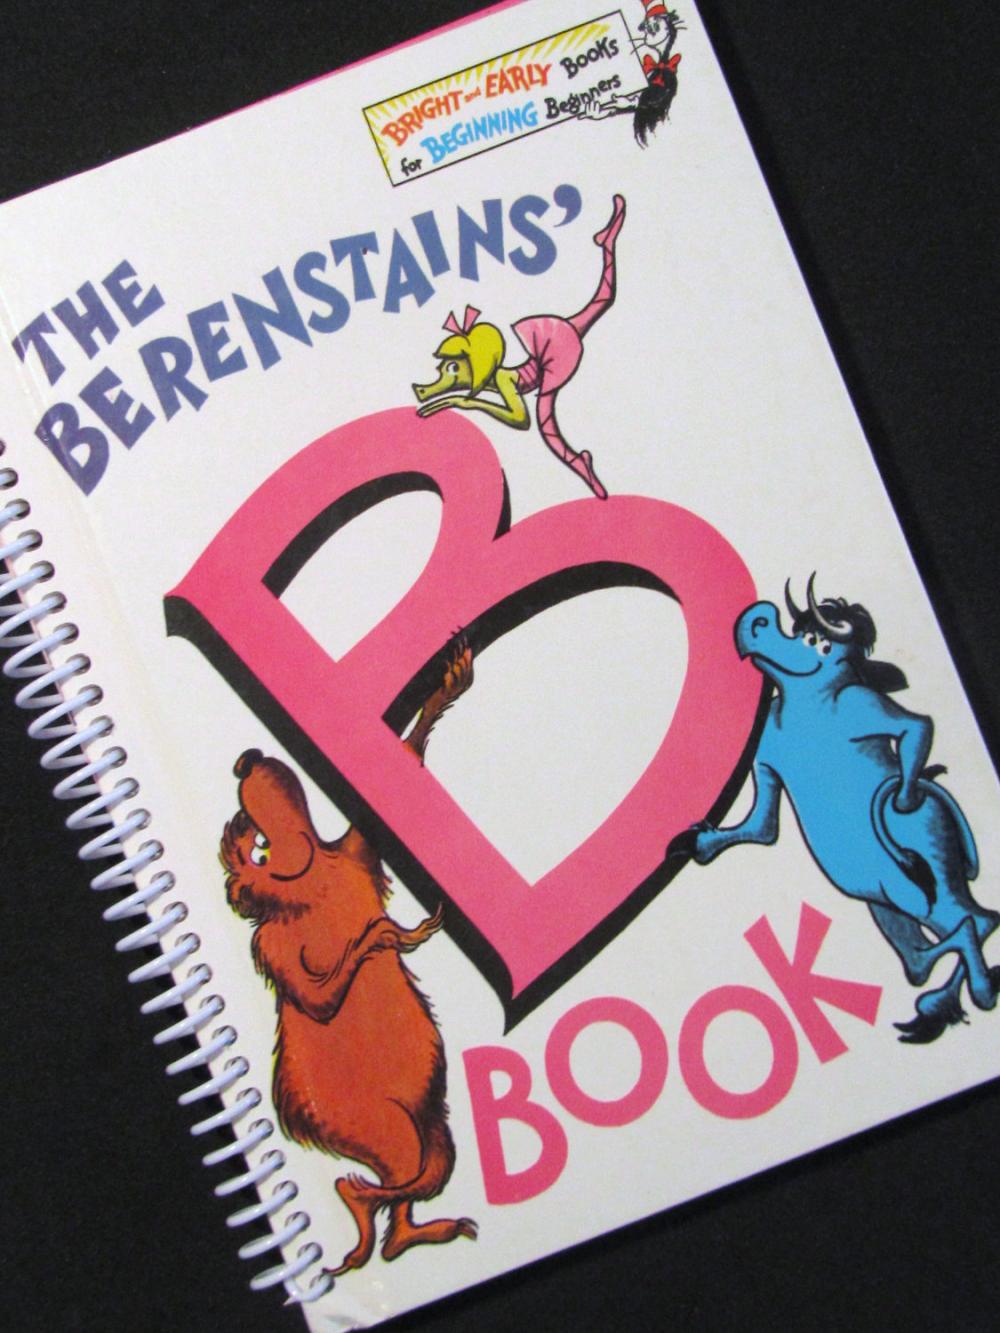 The b book berenstain